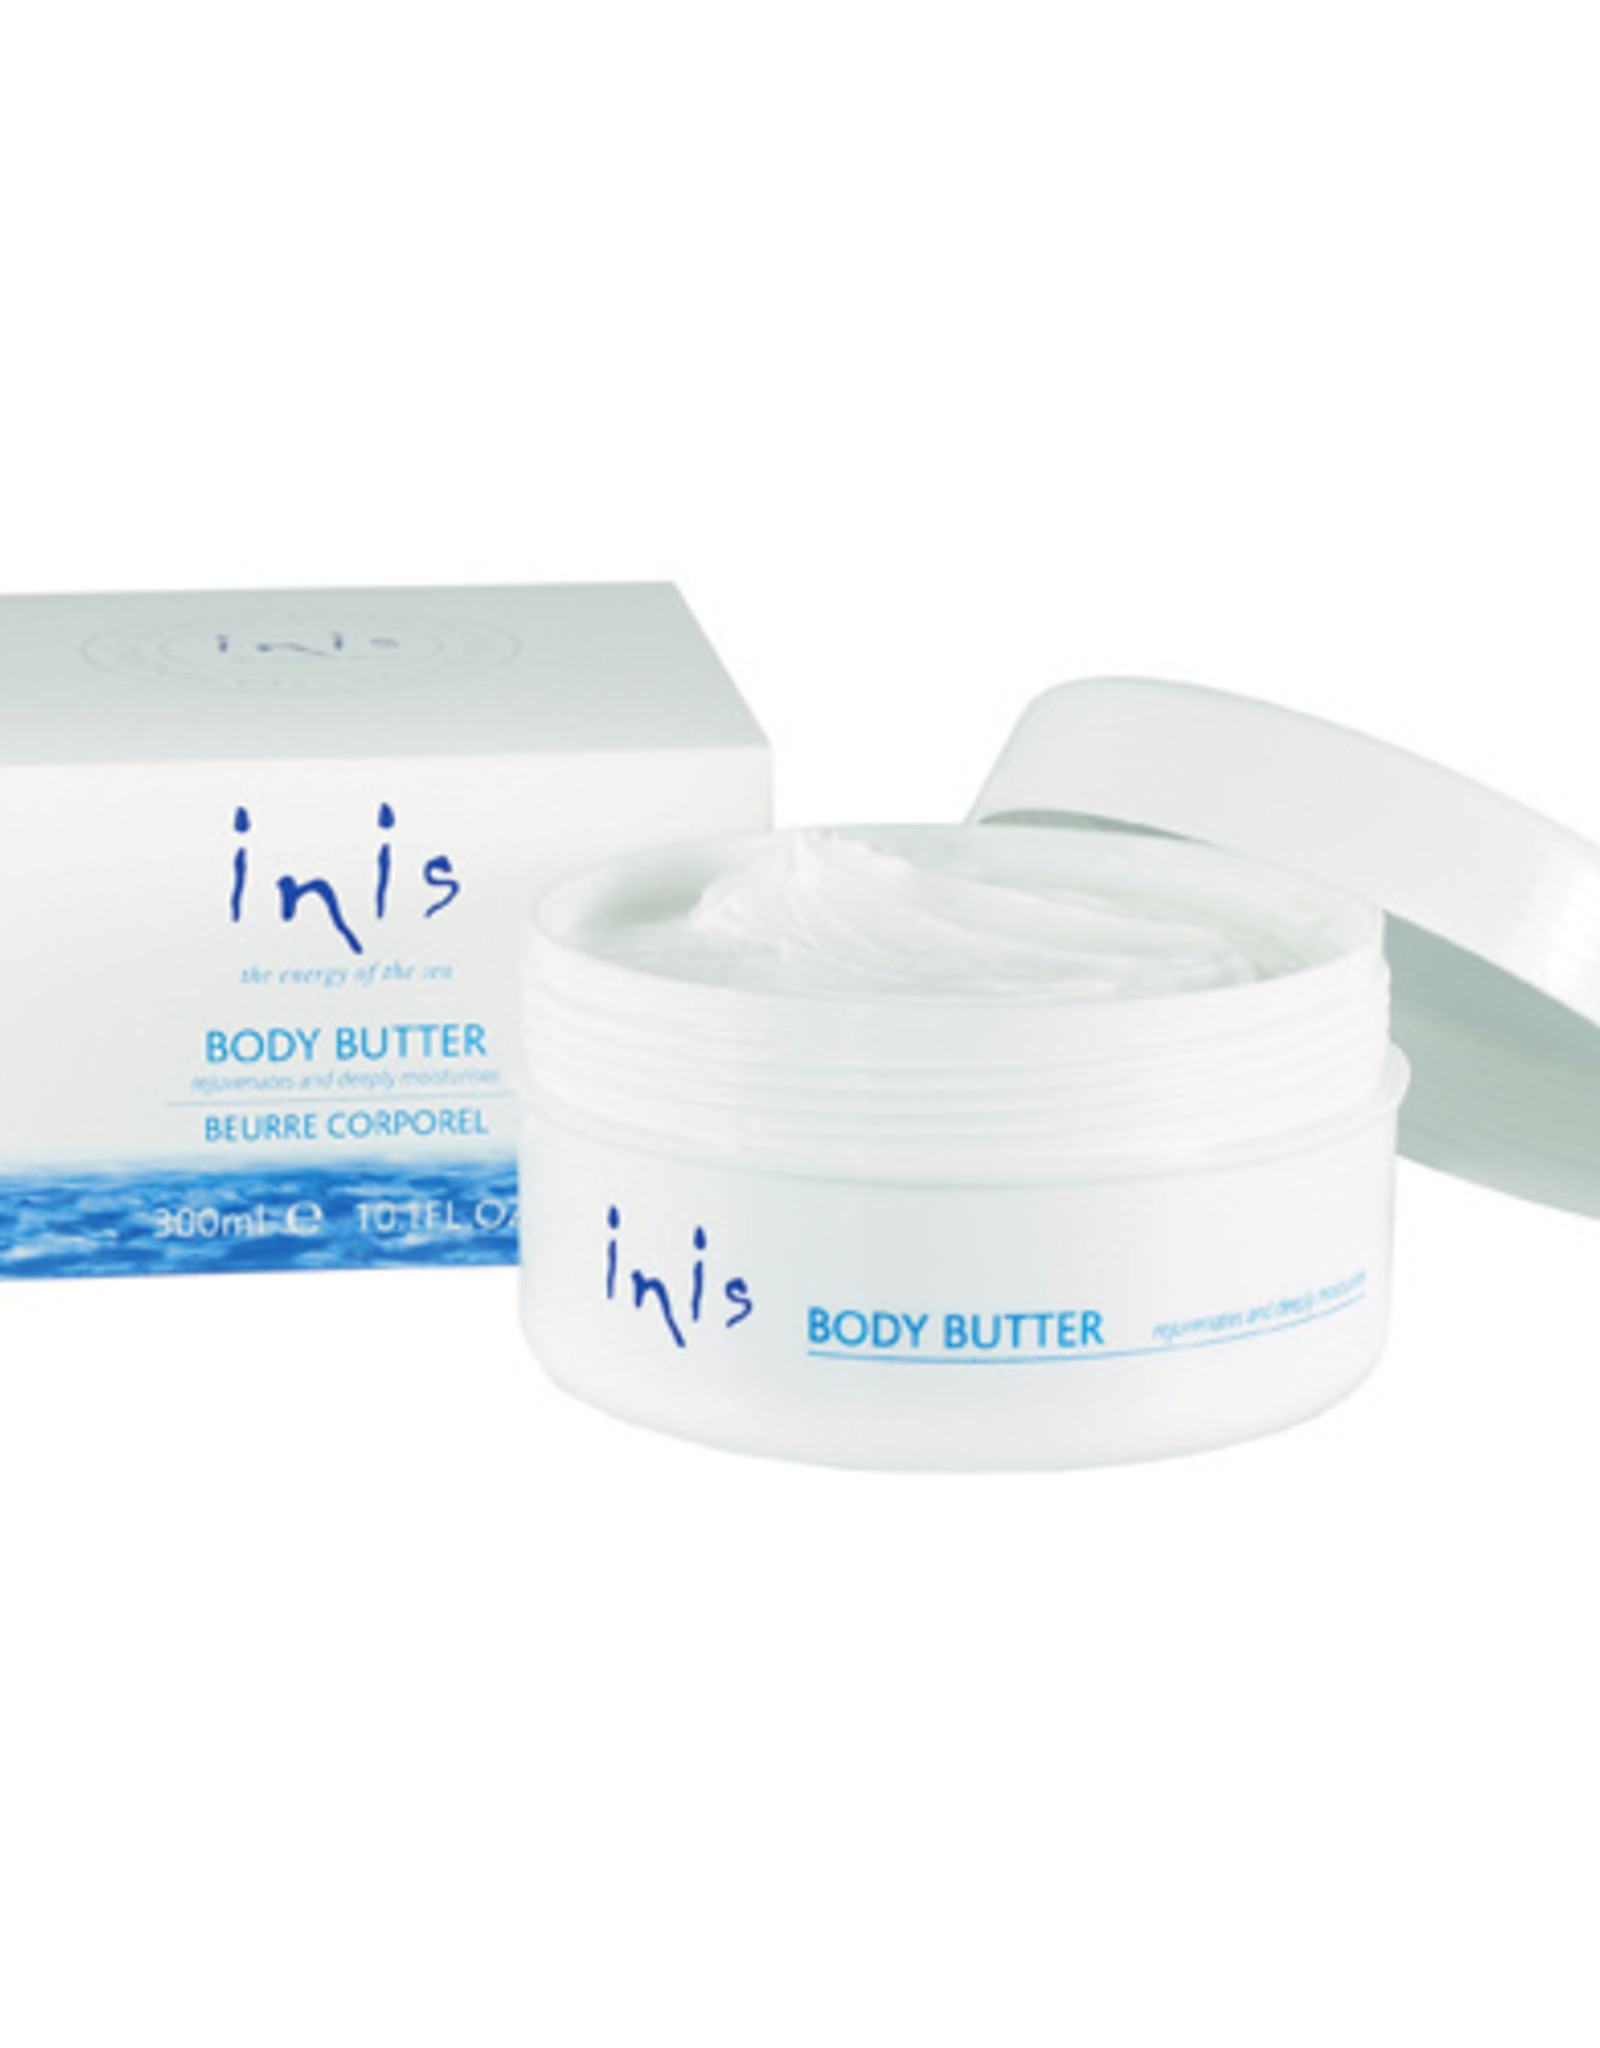 Inis 10.1oz Body Butter